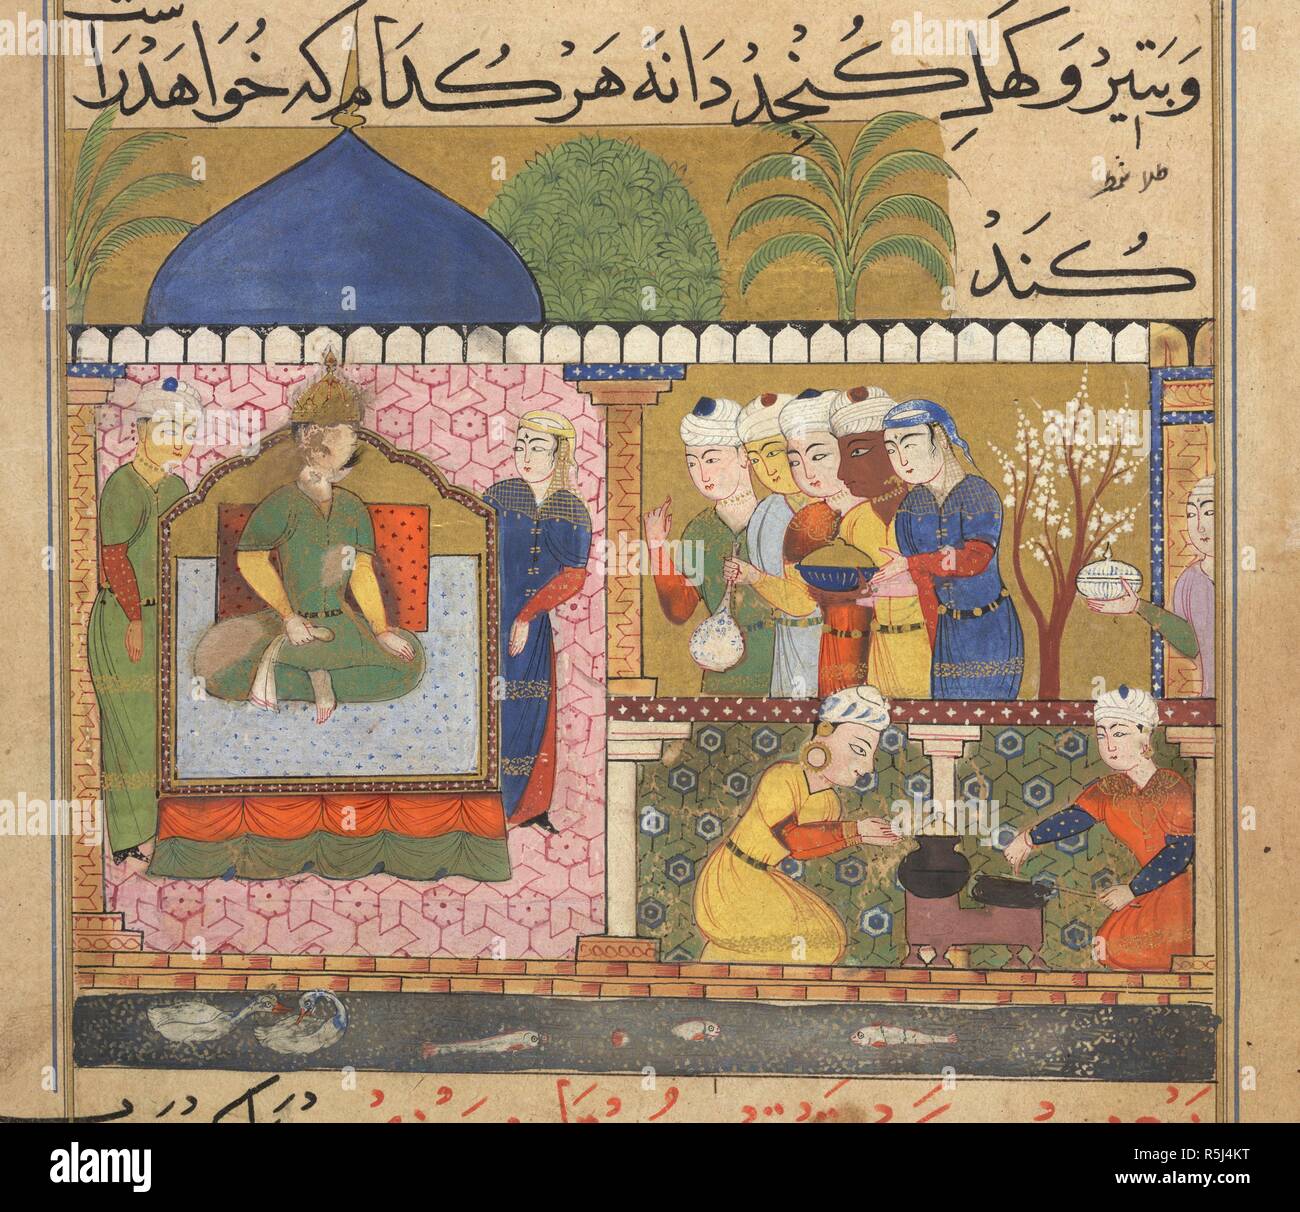 Food being prepared. The Ni'matnama-i Nasir al-Din Shah. A manuscript o. 1495 - 1505. Food being prepared and offered to the Sultan Ghiyath al-Din. Opaque watercolour. Sultanate style.  Image taken from The Ni'matnama-i Nasir al-Din Shah. A manuscript on Indian cookery and the preparation of sweetmeats, spices etc.  Originally published/produced in 1495 - 1505. . Source: I.O. ISLAMIC 149, f.29. Language: Persian. Stock Photo